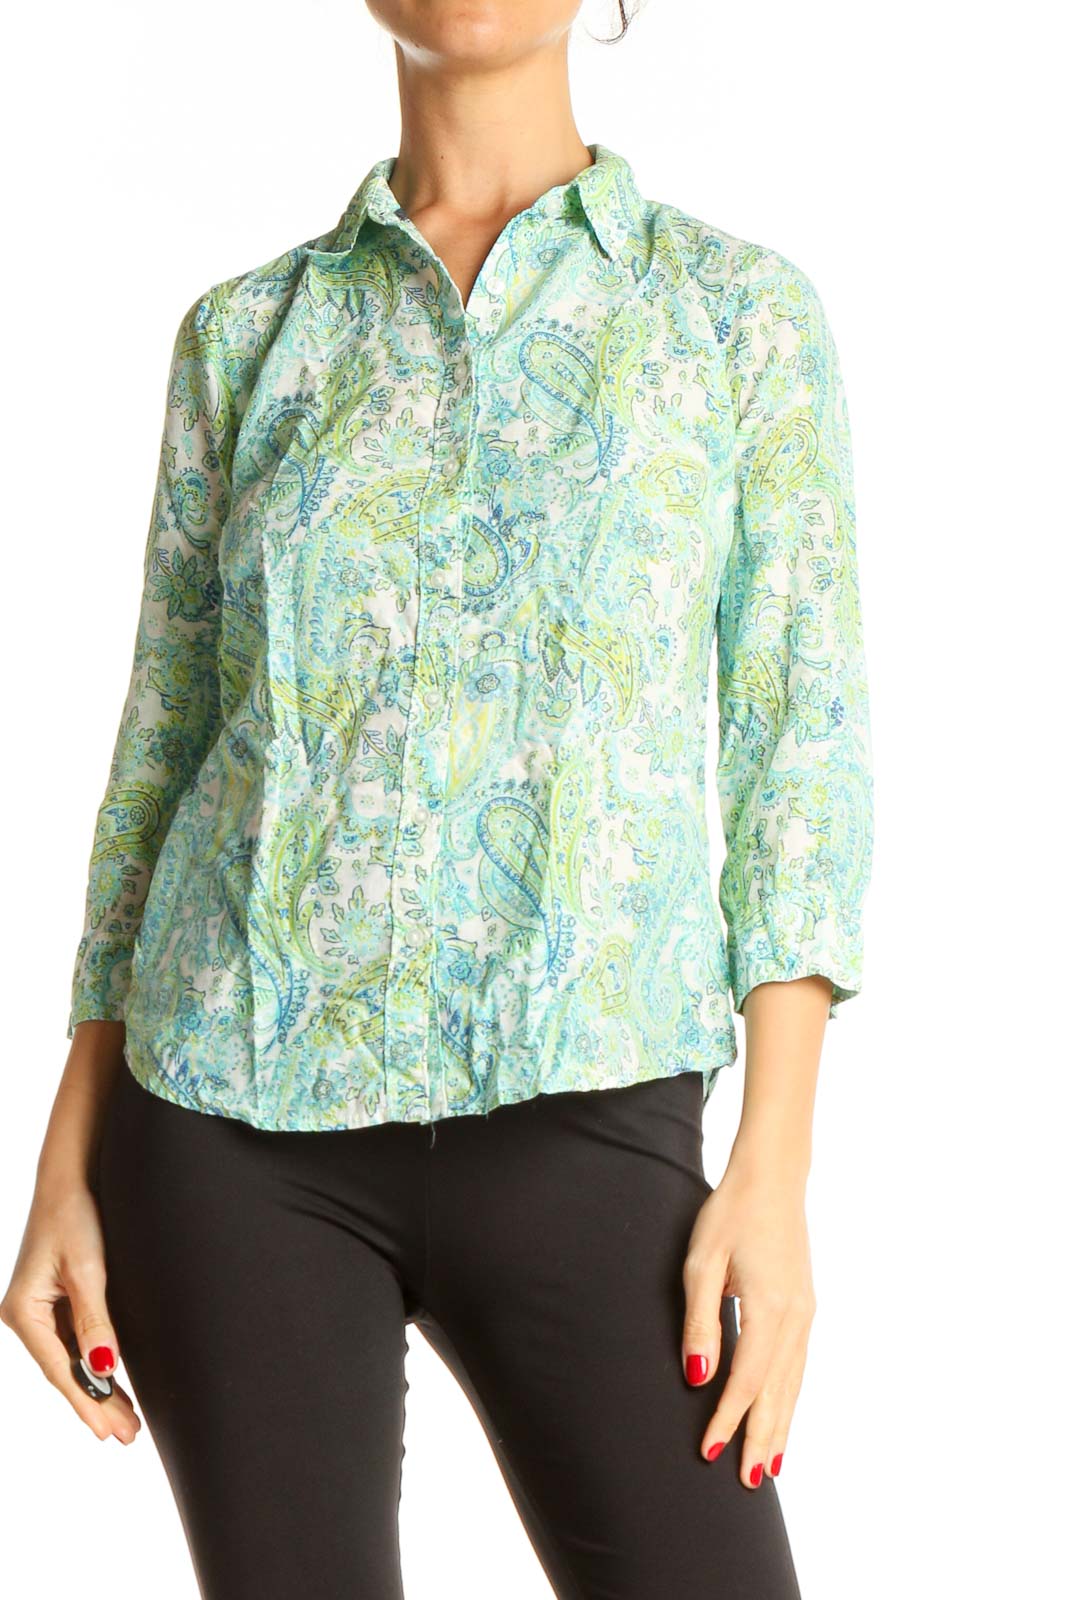 Green Paisley All Day Wear Top Front